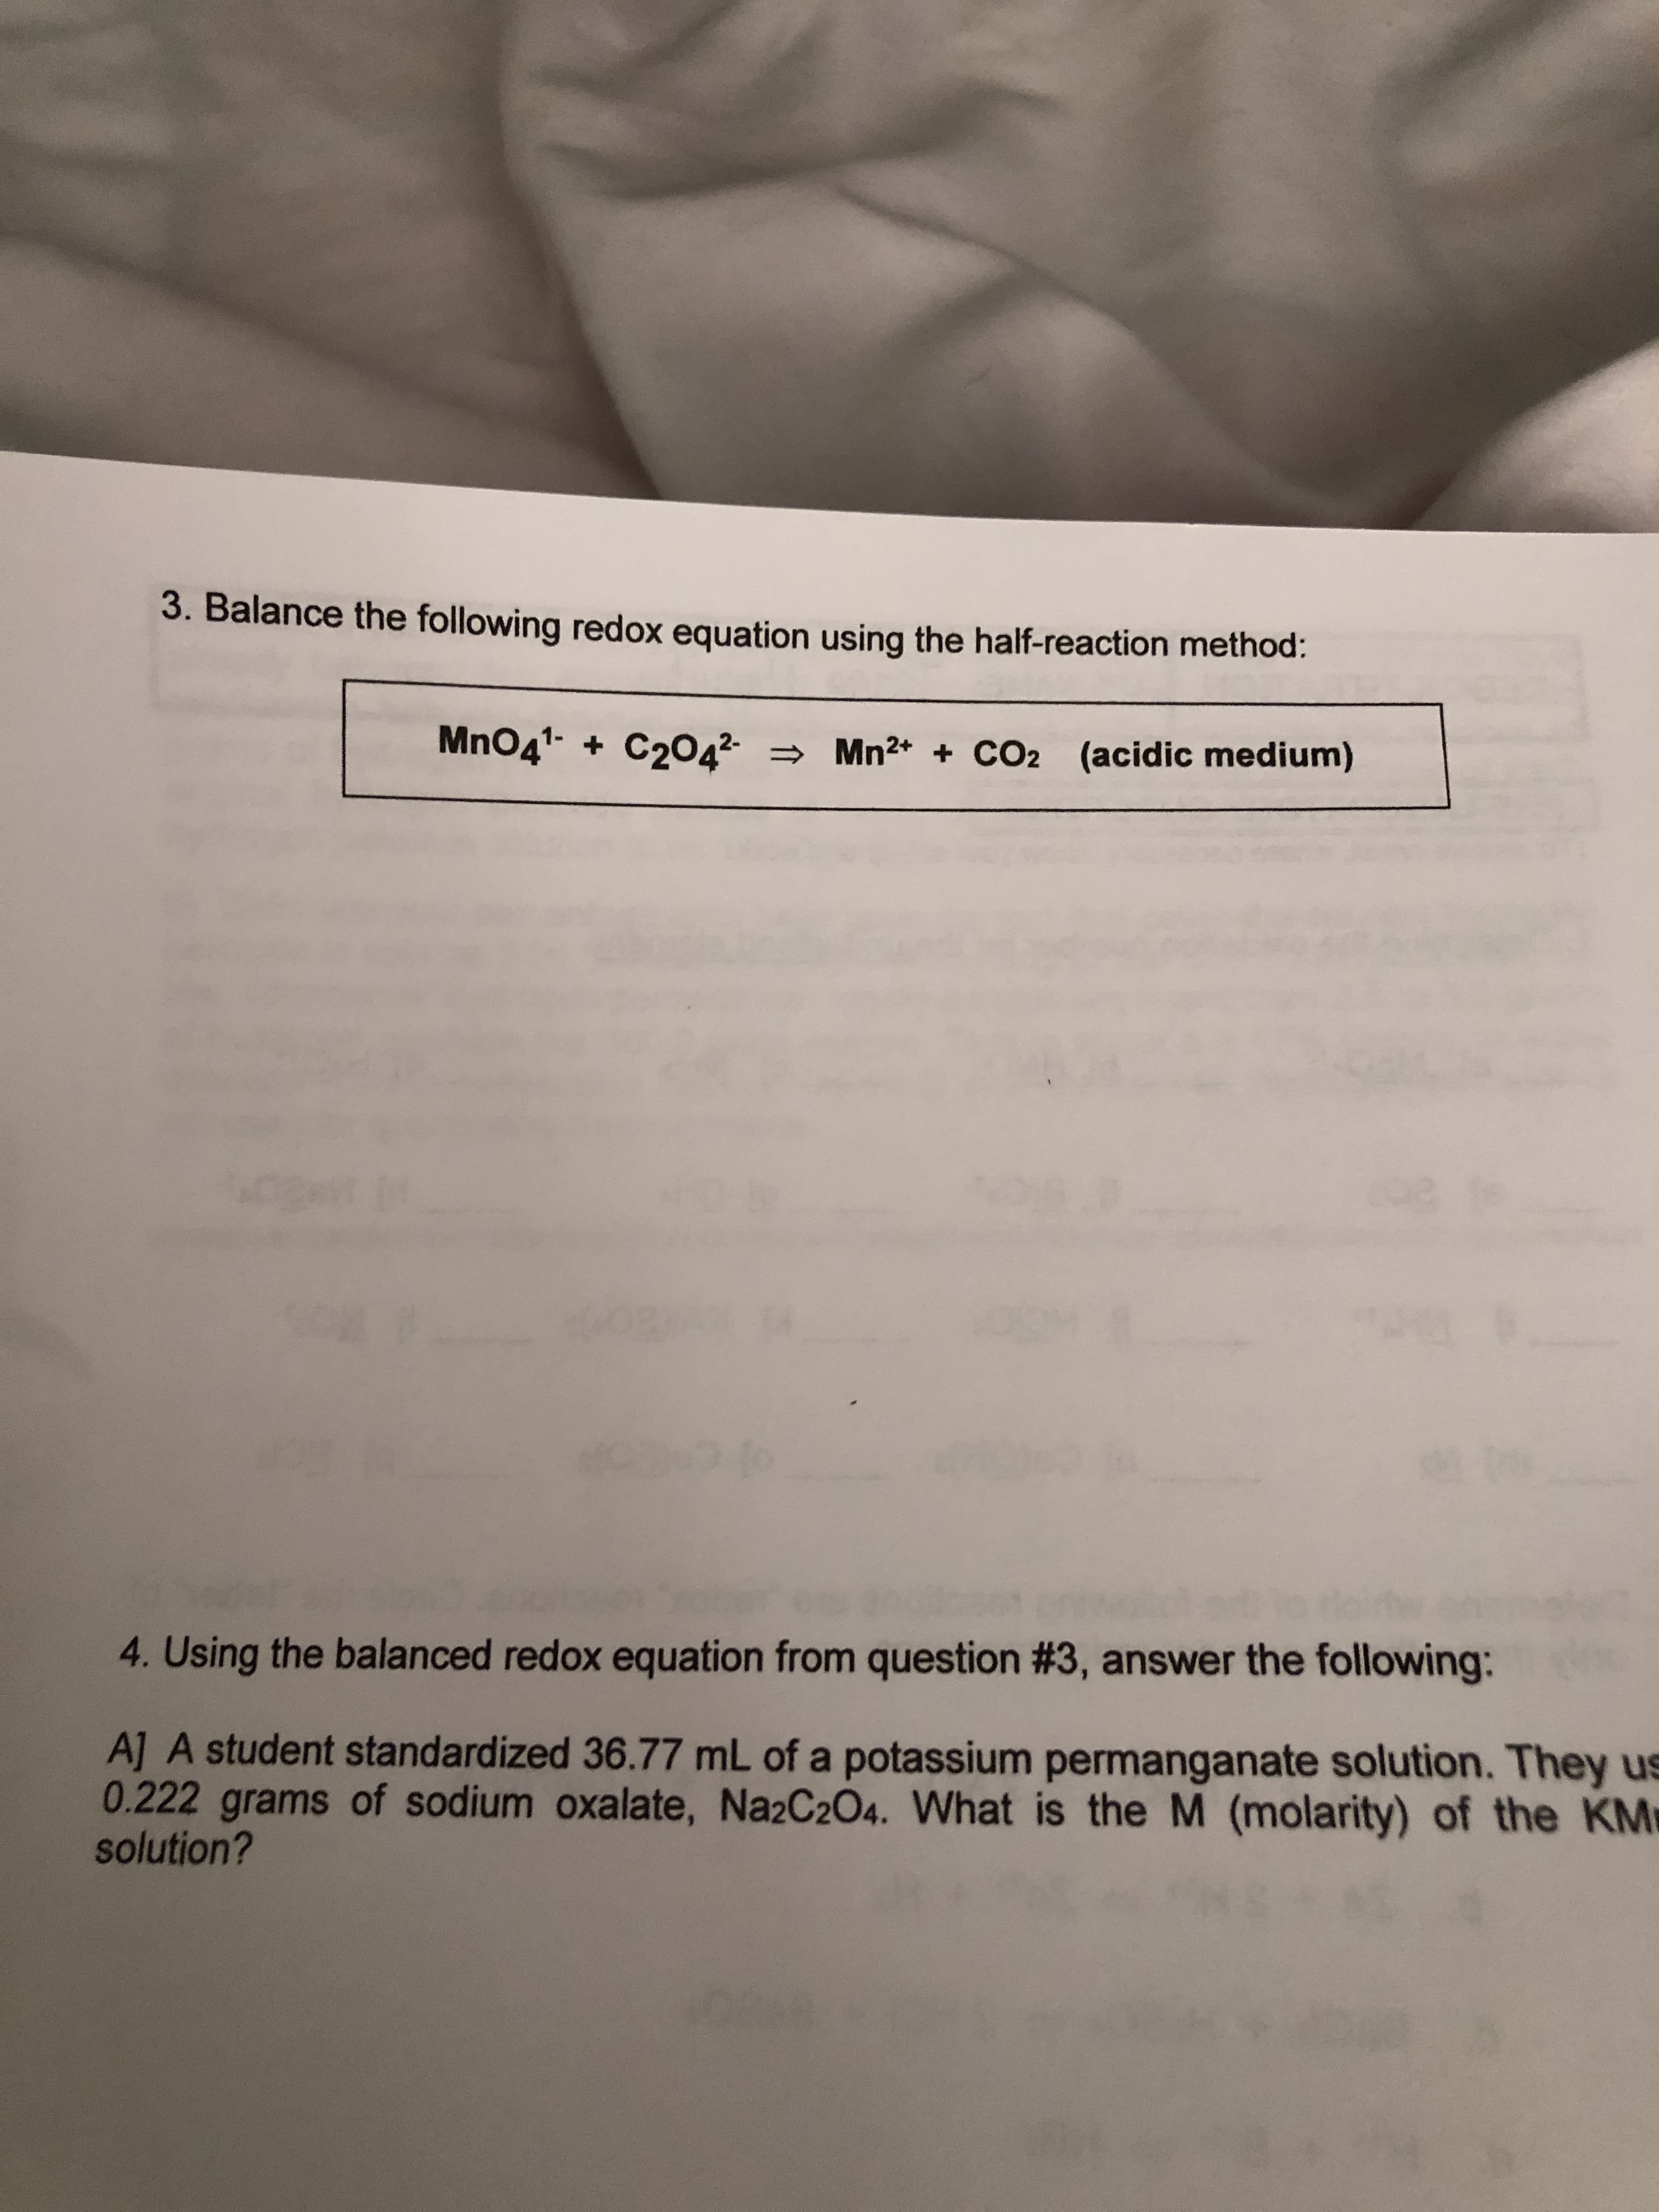 3. Balance the following redox equation using the half-reaction method:
MnO41 C2042 Mn2* +
CO2 (acidic medium)
4. Using the balanced redox equation from question #3, answer the following:
A] A student standardized 36.77 mL of a potassium permanganate solution. They us
0.222 grams of sodium oxalate, Na2C2O4. What is the M (molarity) of the KM
solution?
